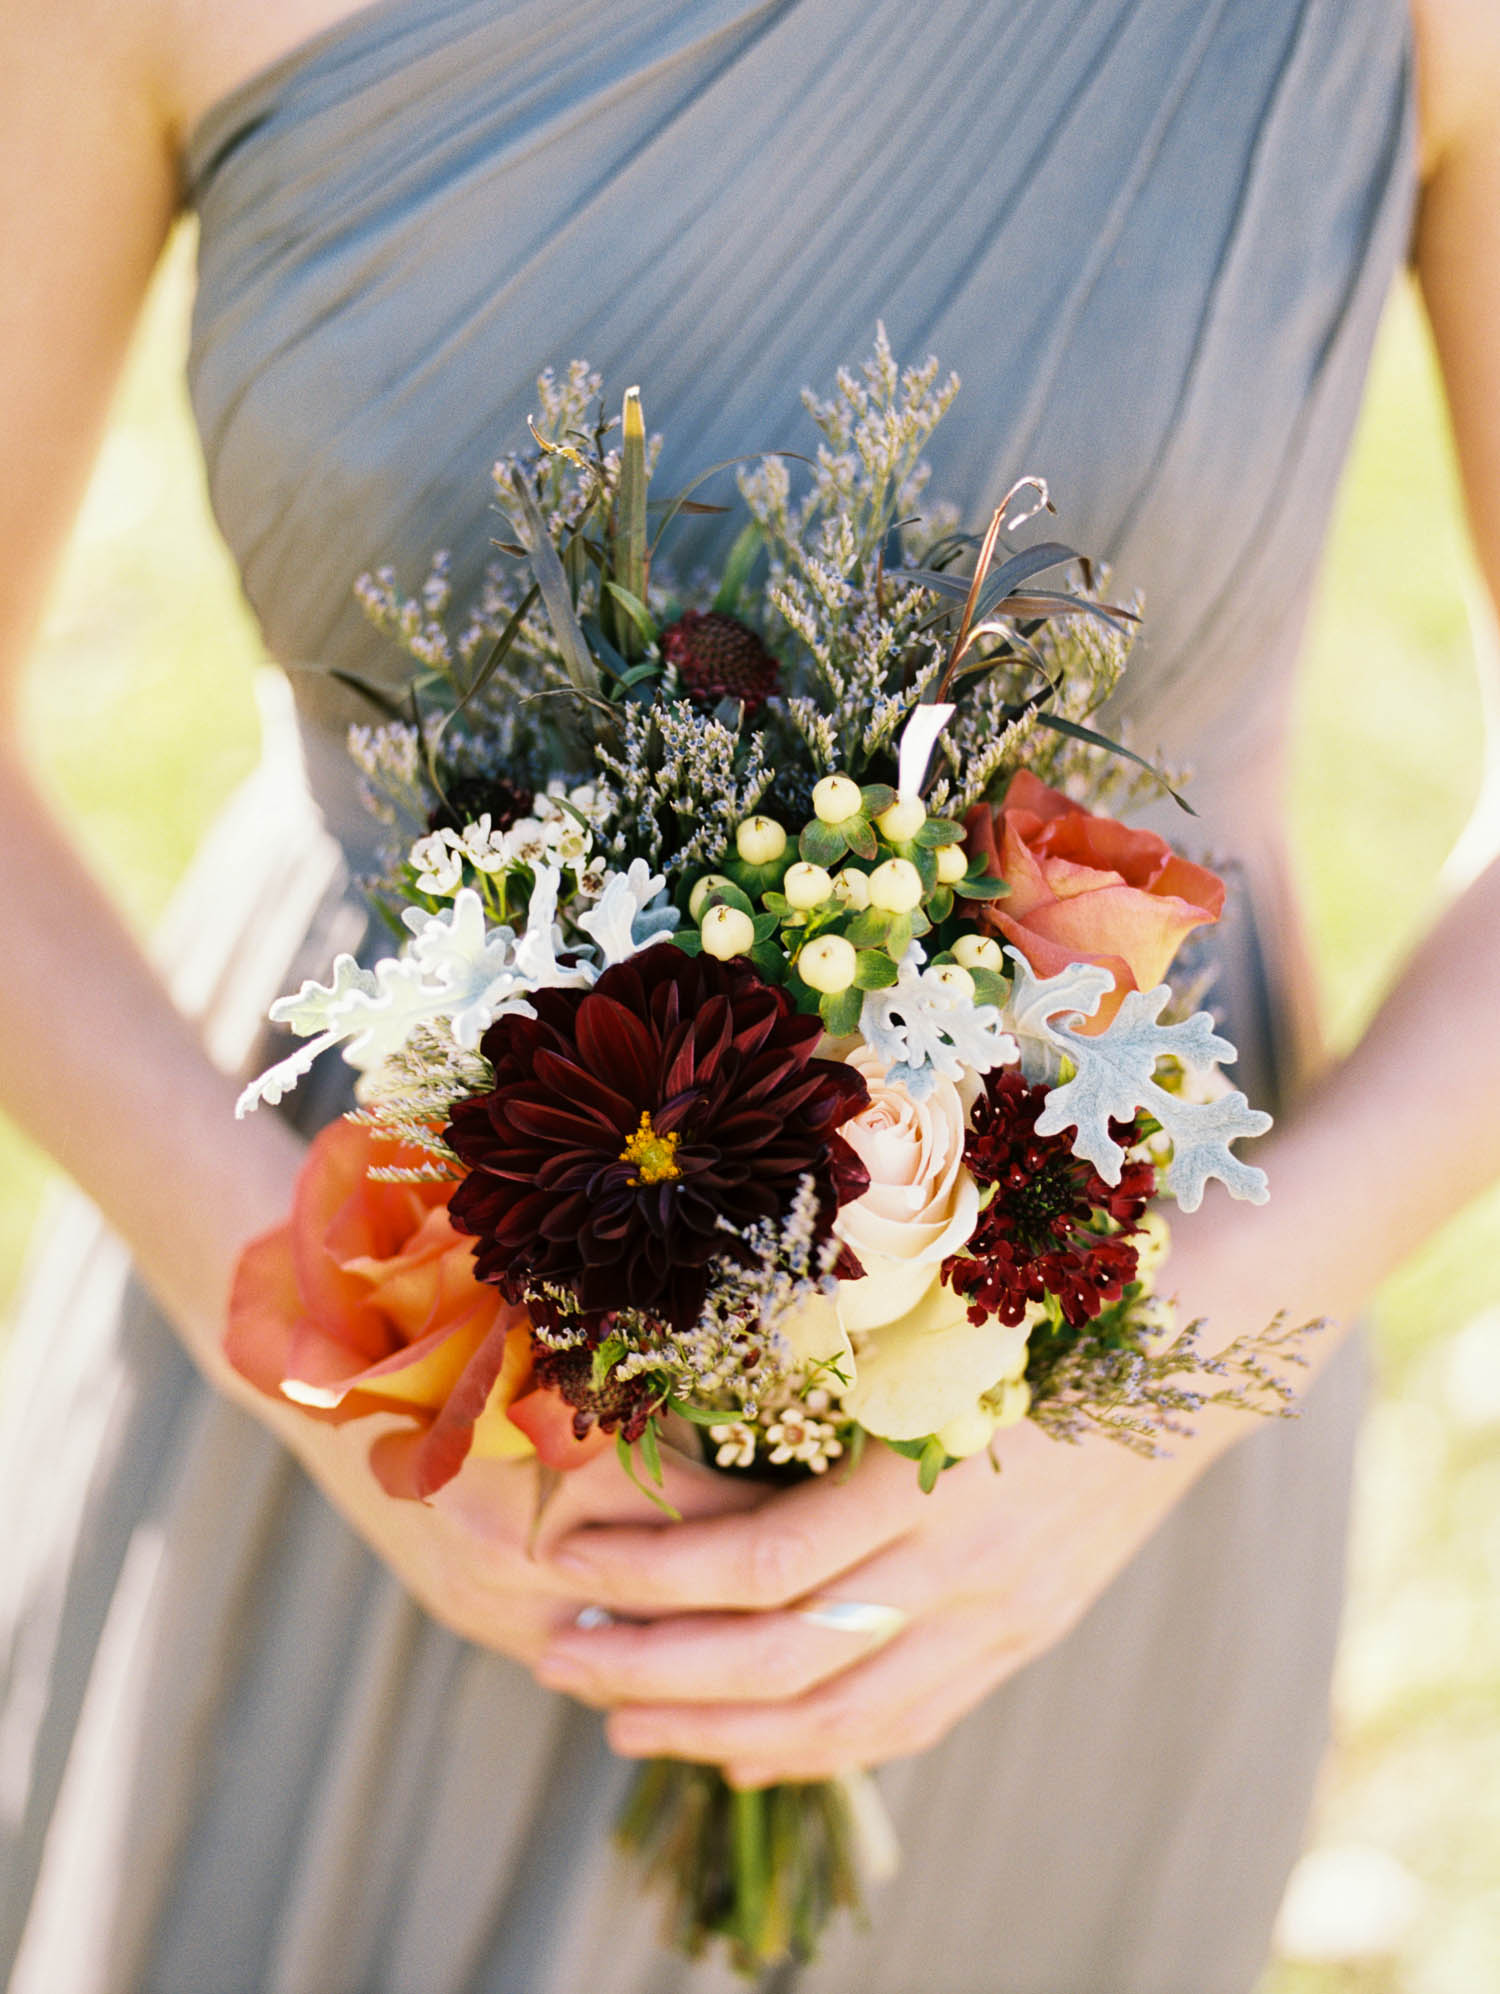 Rustic Fall Bouquet with Dahlias, Roses, and Hypericum Berries